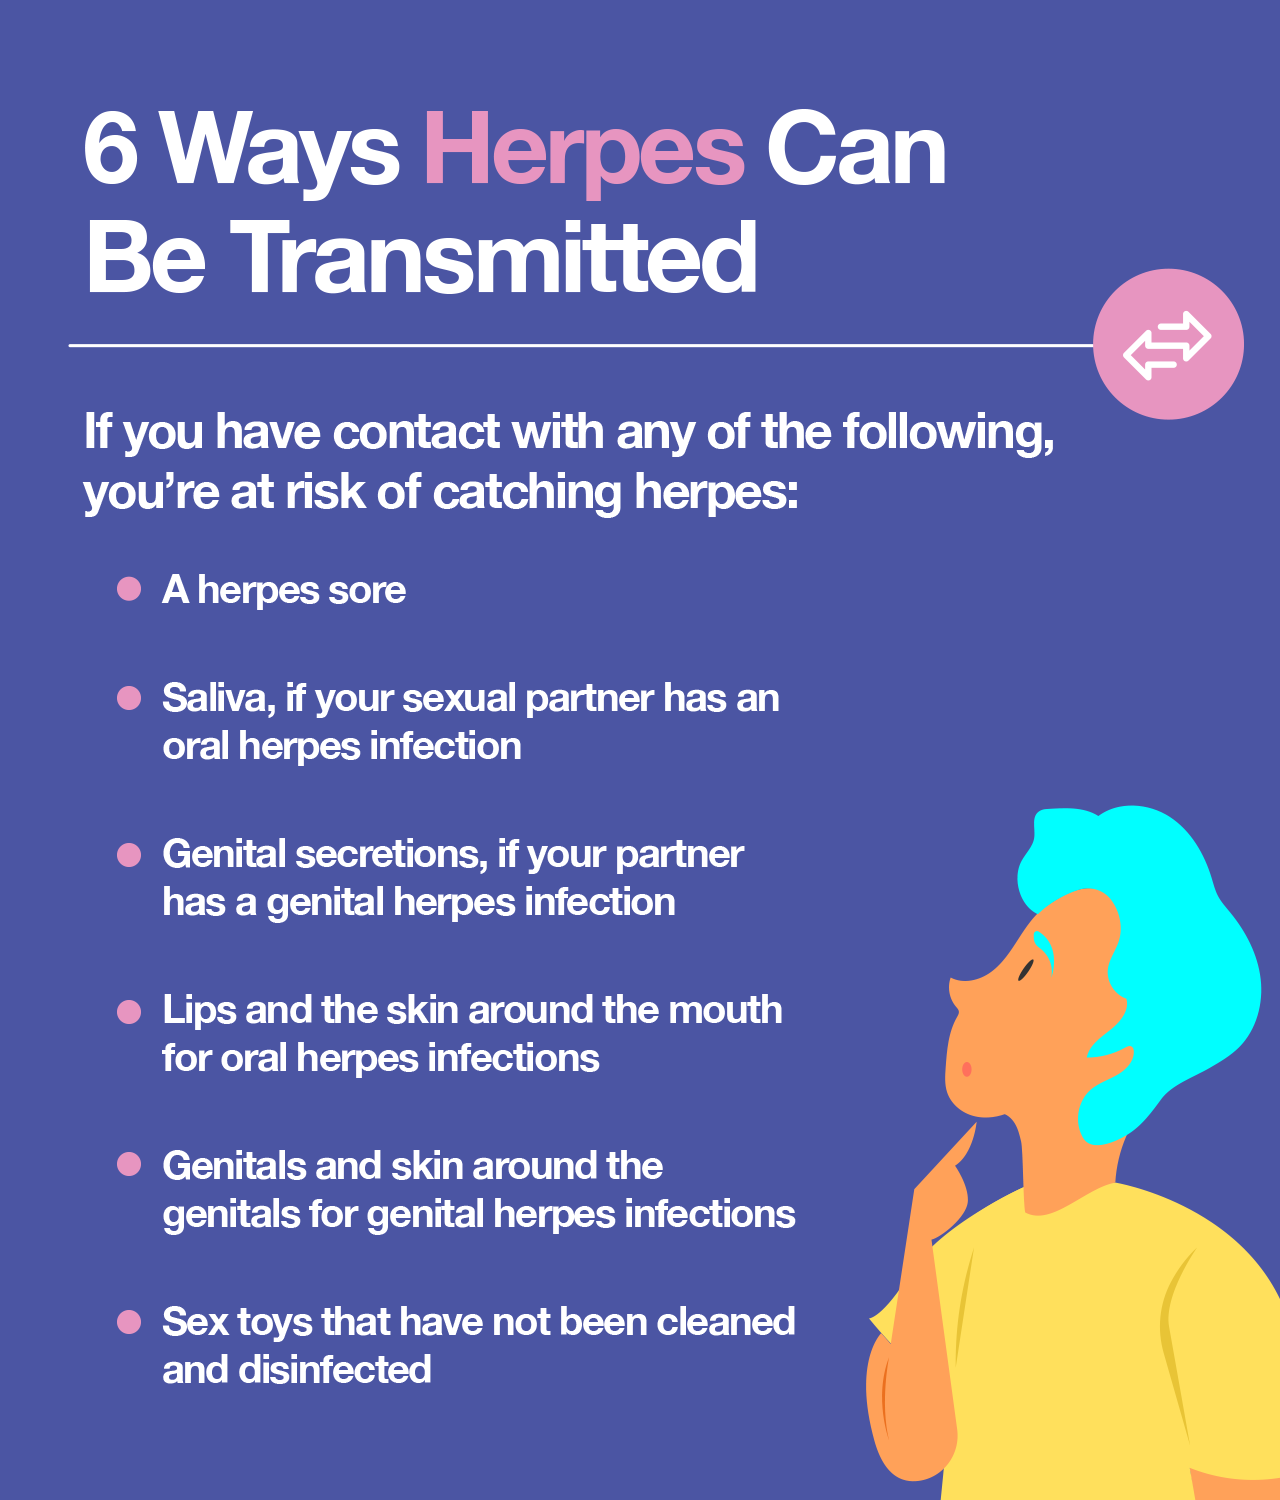 Is herpes curable? Get the facts.